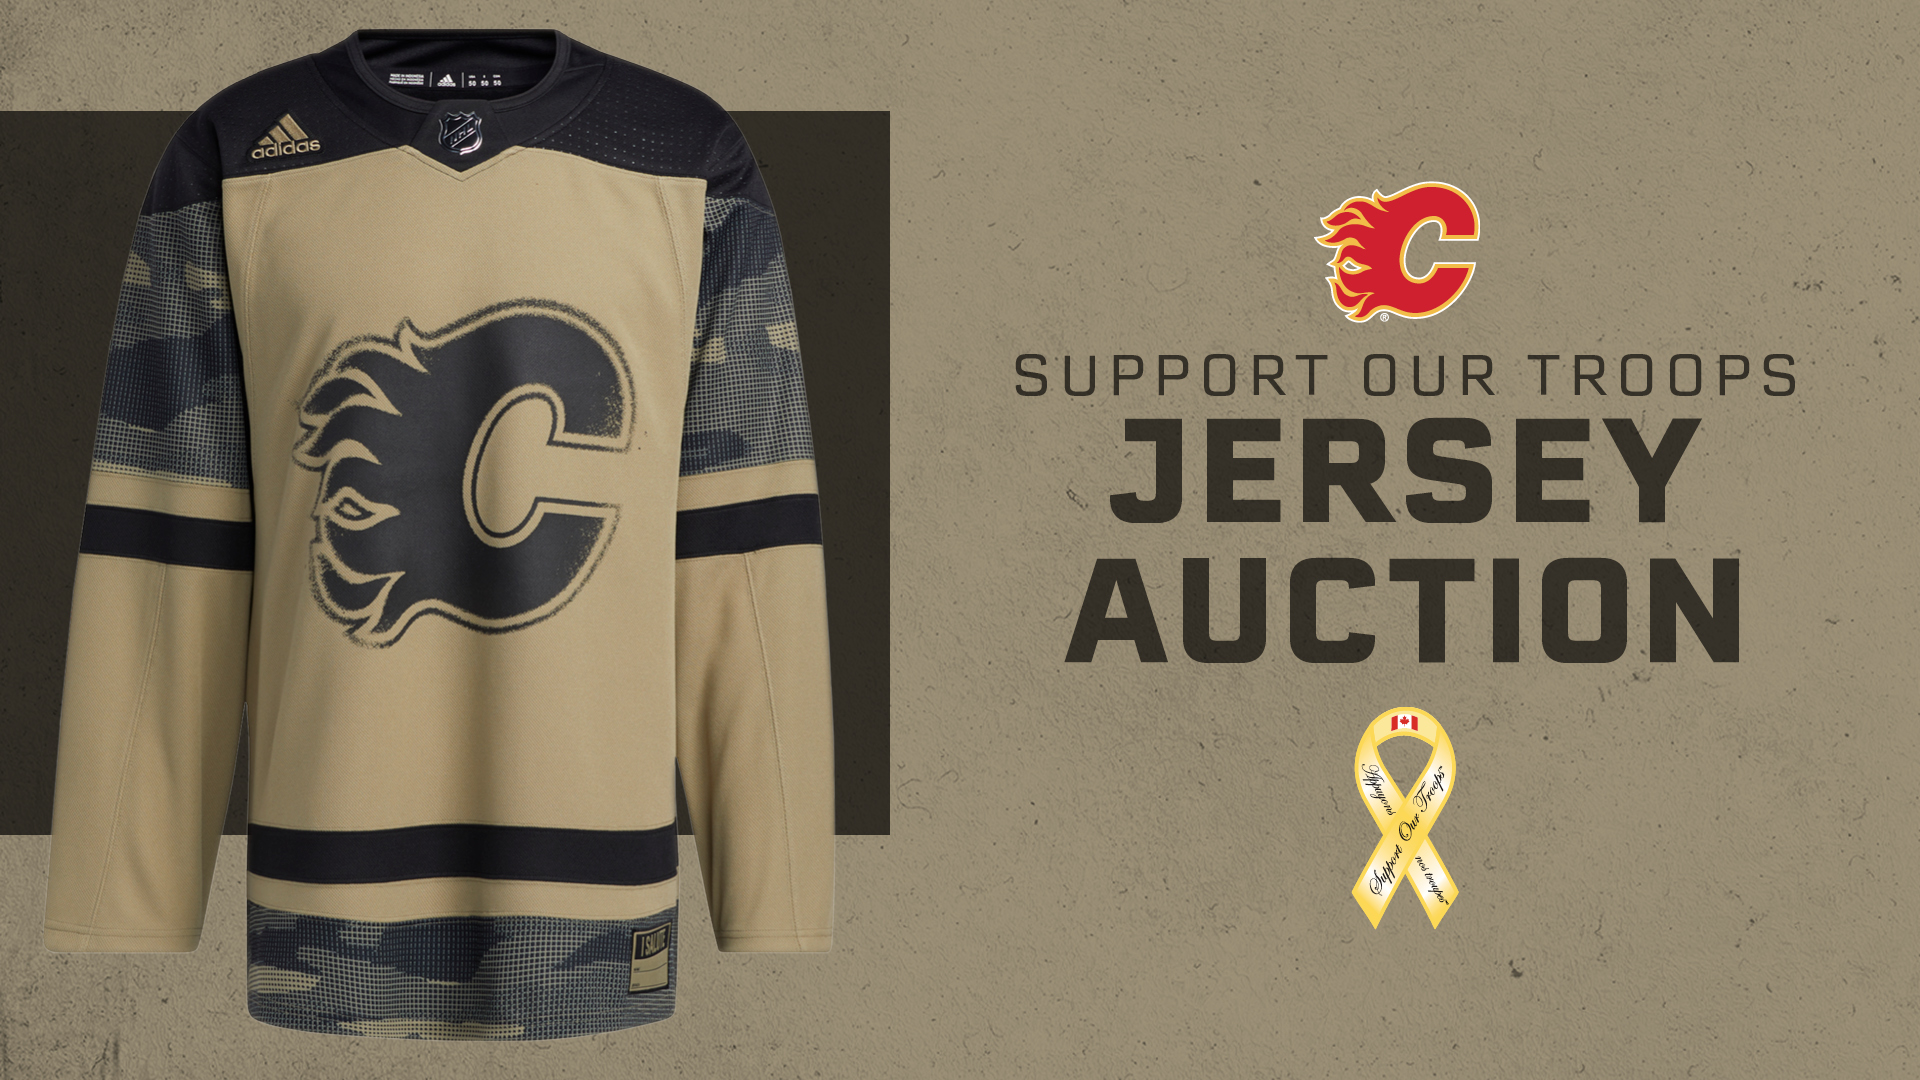 Calgary Flames] Thanks to you, over the last month we have set TWO new  jersey auction records: our Indigenous Celebration and Pride warm-up jerseys  are our most successful jersey auctions ever with